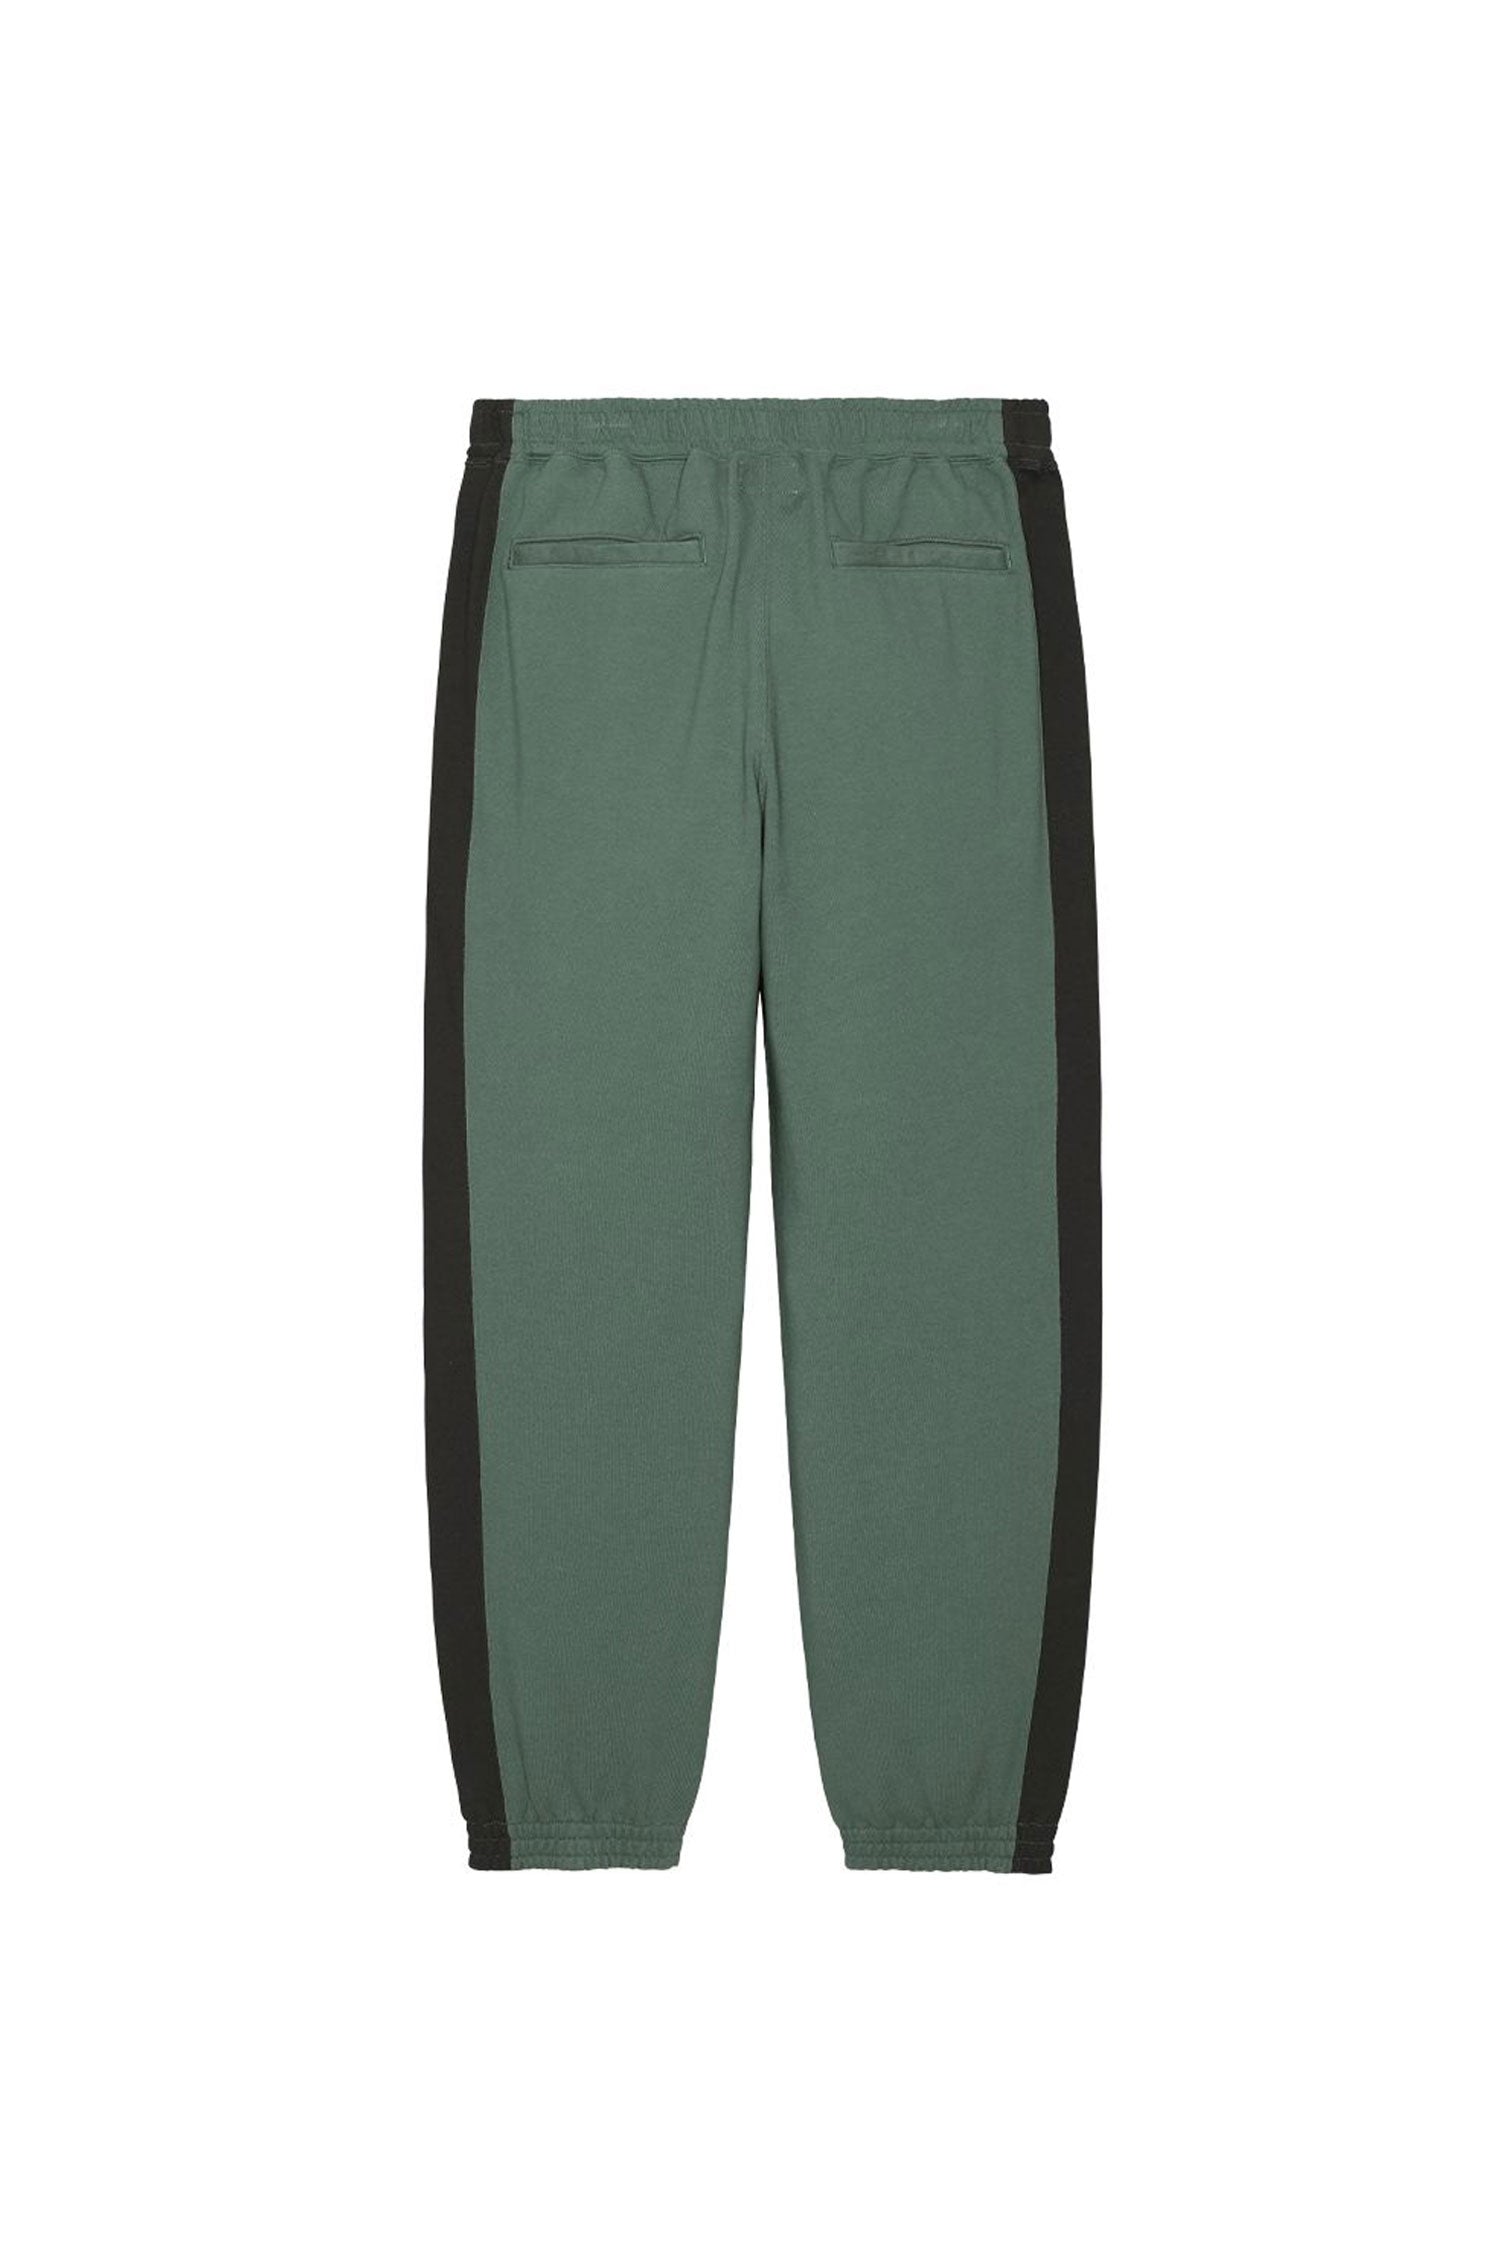 The CAV EMPT - PANELED TWO TONE JOG PANTS  available online with global shipping, and in PAM Stores Melbourne and Sydney.